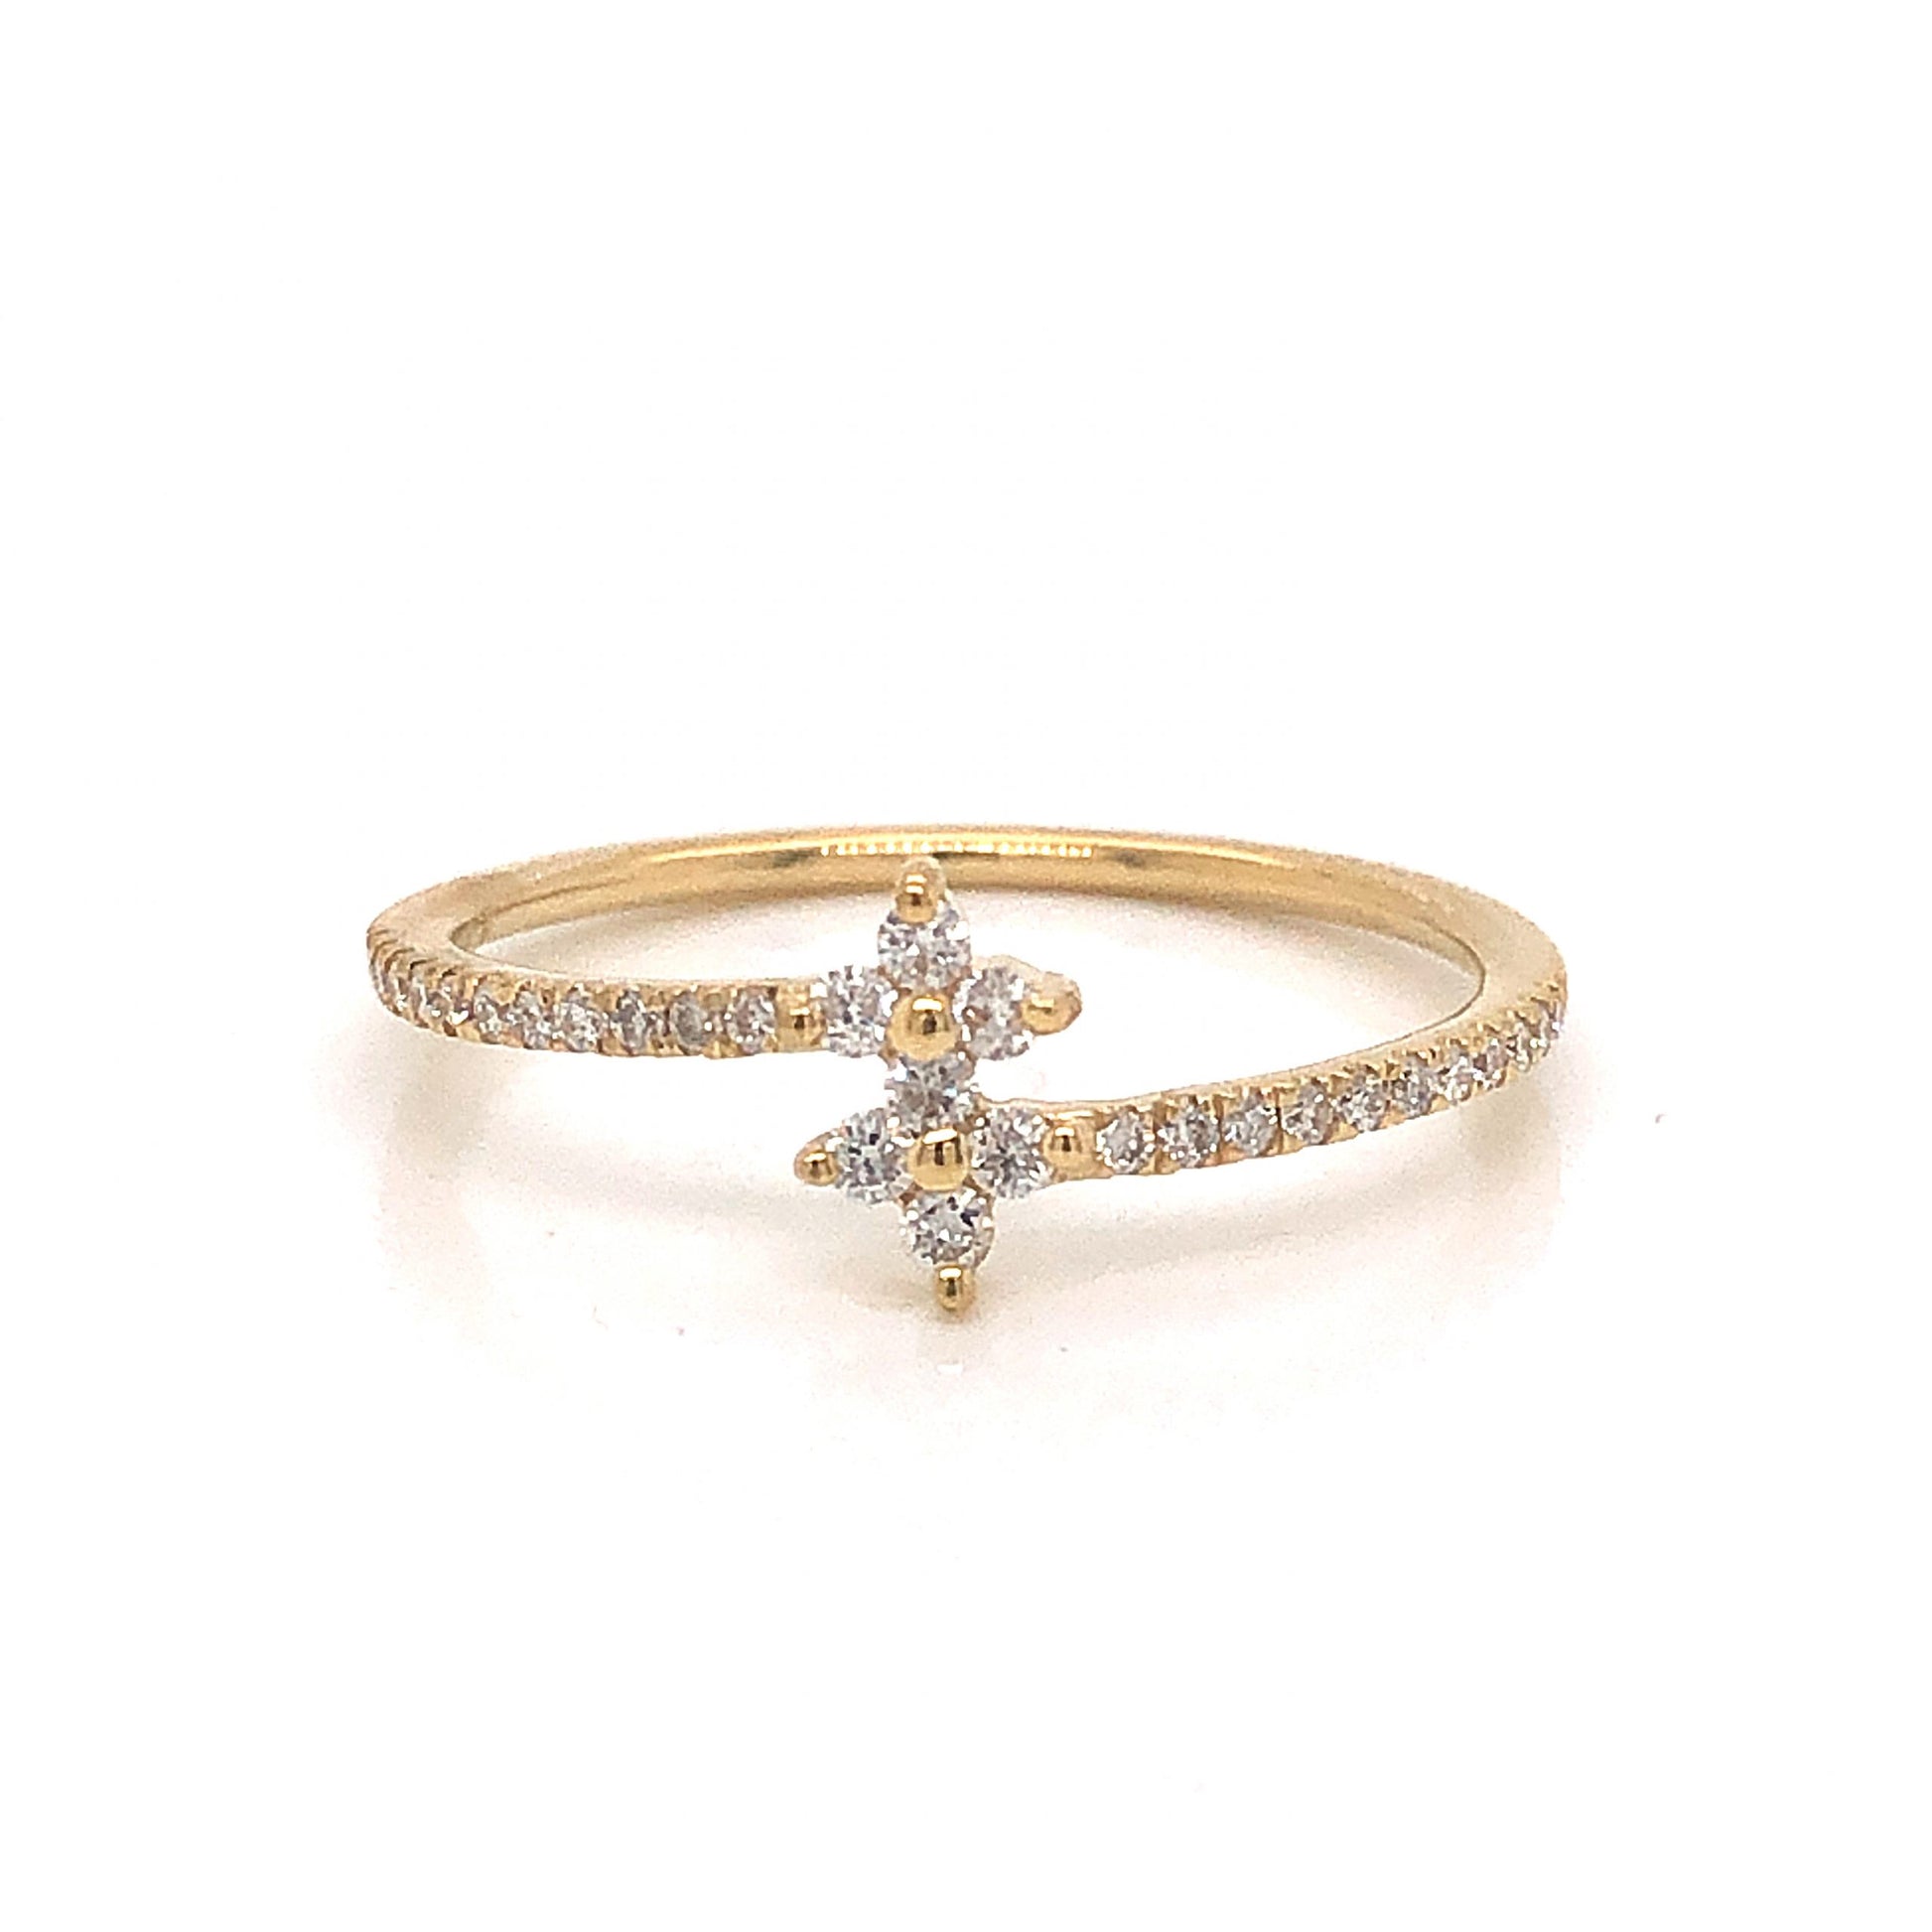 .13 Pave Diamond Cluster Stacking Ring in 14k Yellow GoldComposition: 14 Karat Yellow GoldRing Size: 6.5Total Diamond Weight: .13 ctTotal Gram Weight: 1.1 gInscription: 14k 